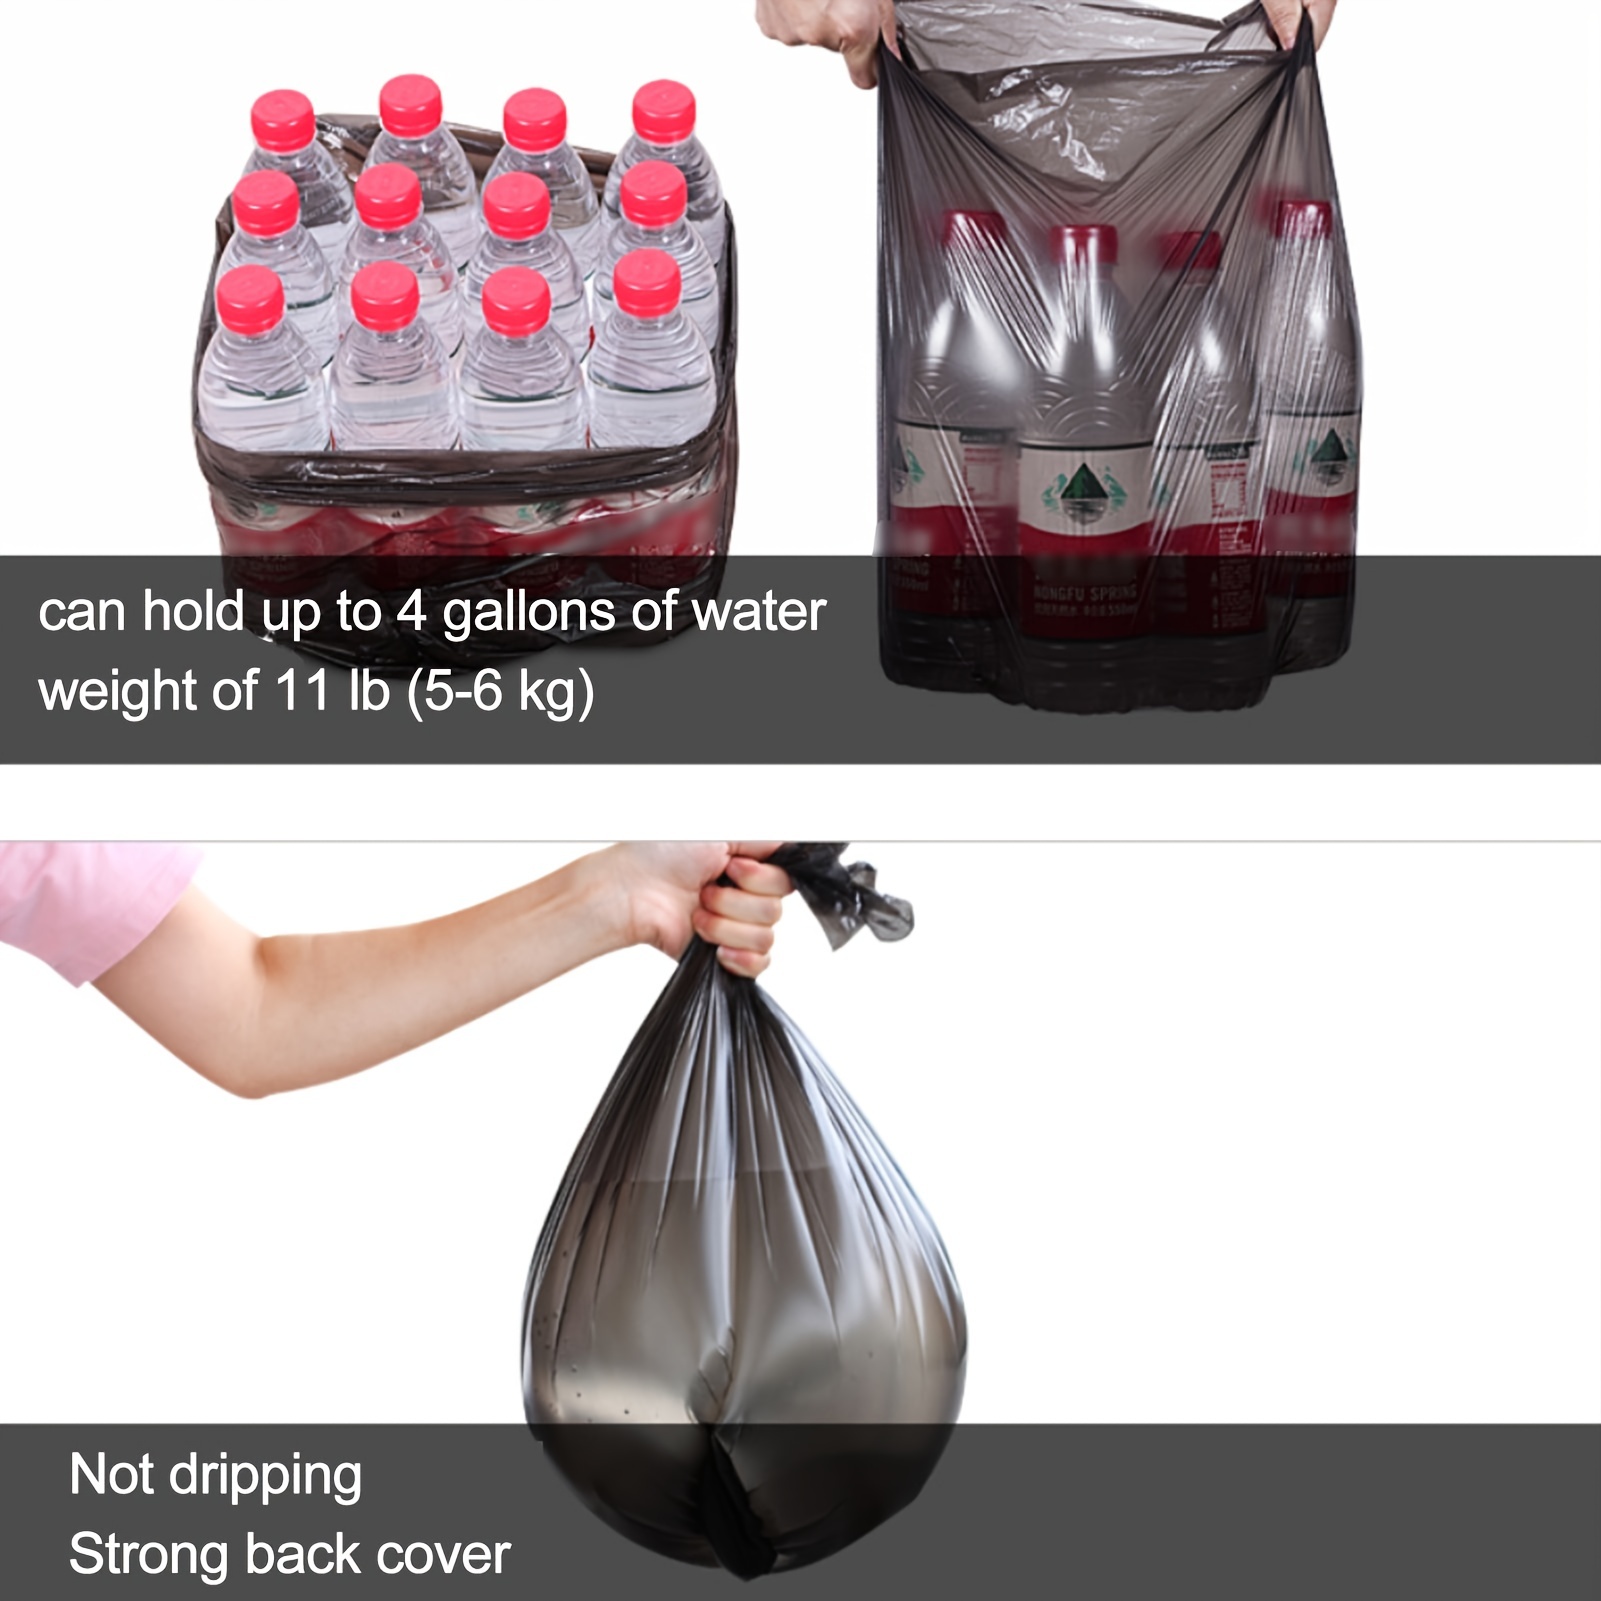 Strong Trash Bags: How Much Weight Can They Hold? 